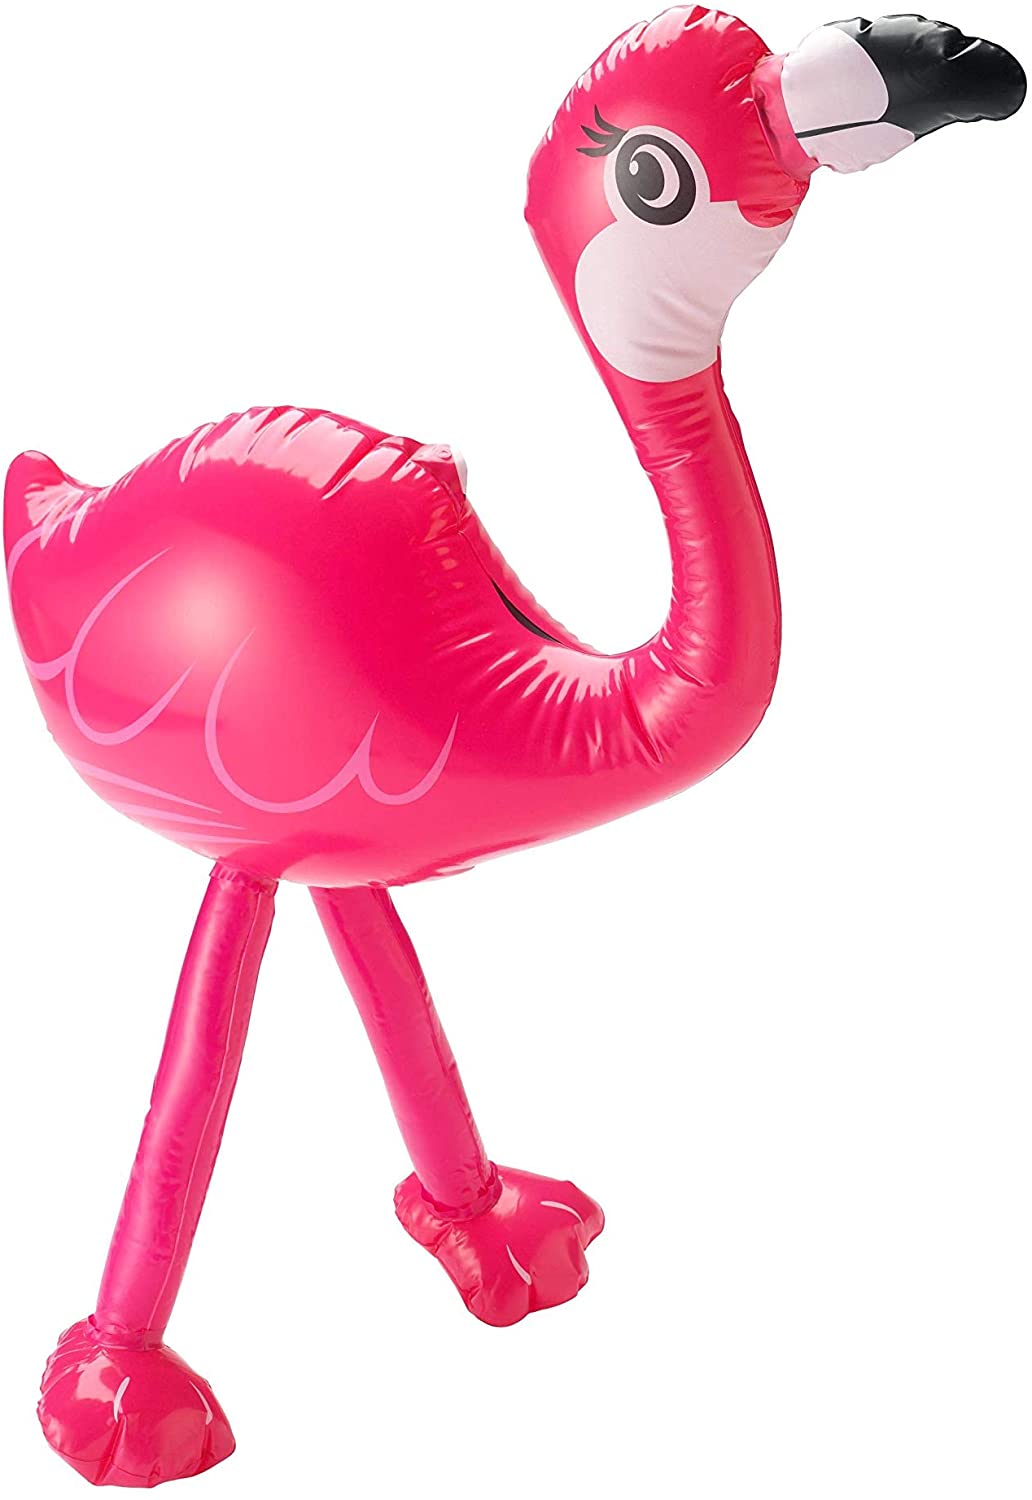 Smiffy's 40382 Inflatable Flamingo, Hot Pink, One Size